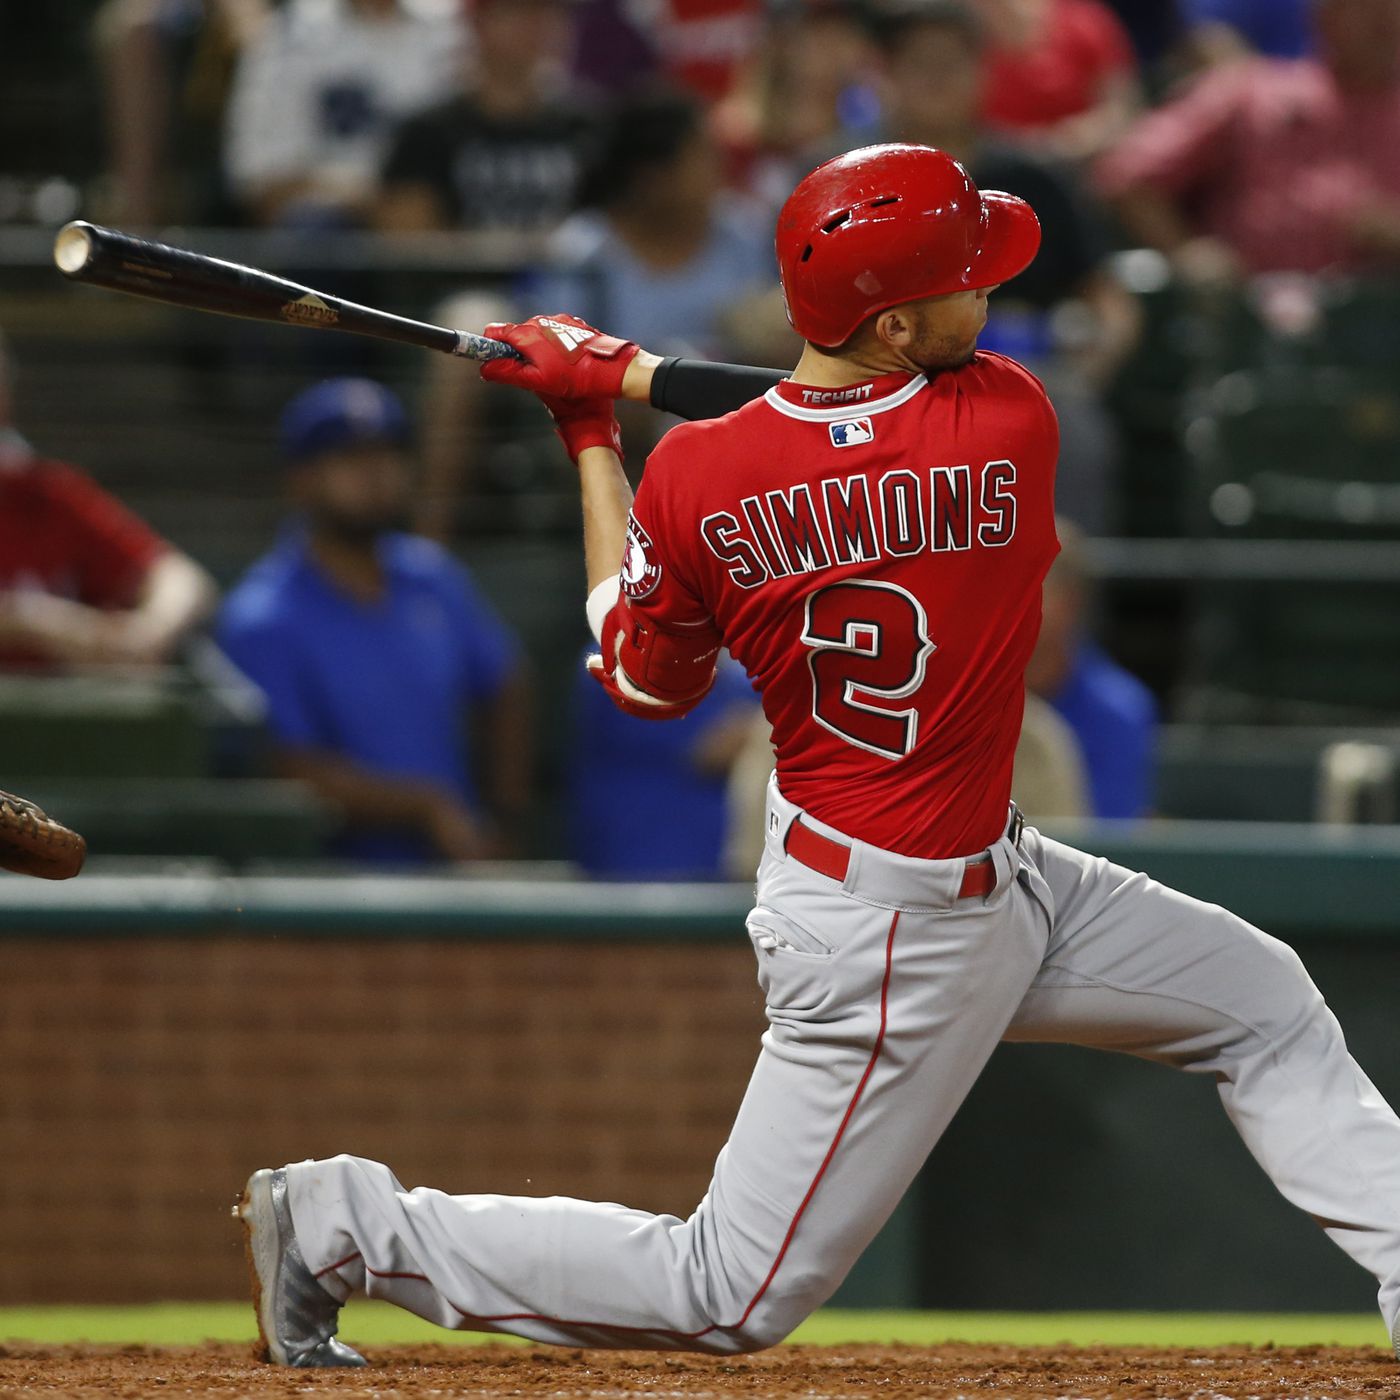 Andrelton Simmons Pull Hitting Brought Him To Even Greater